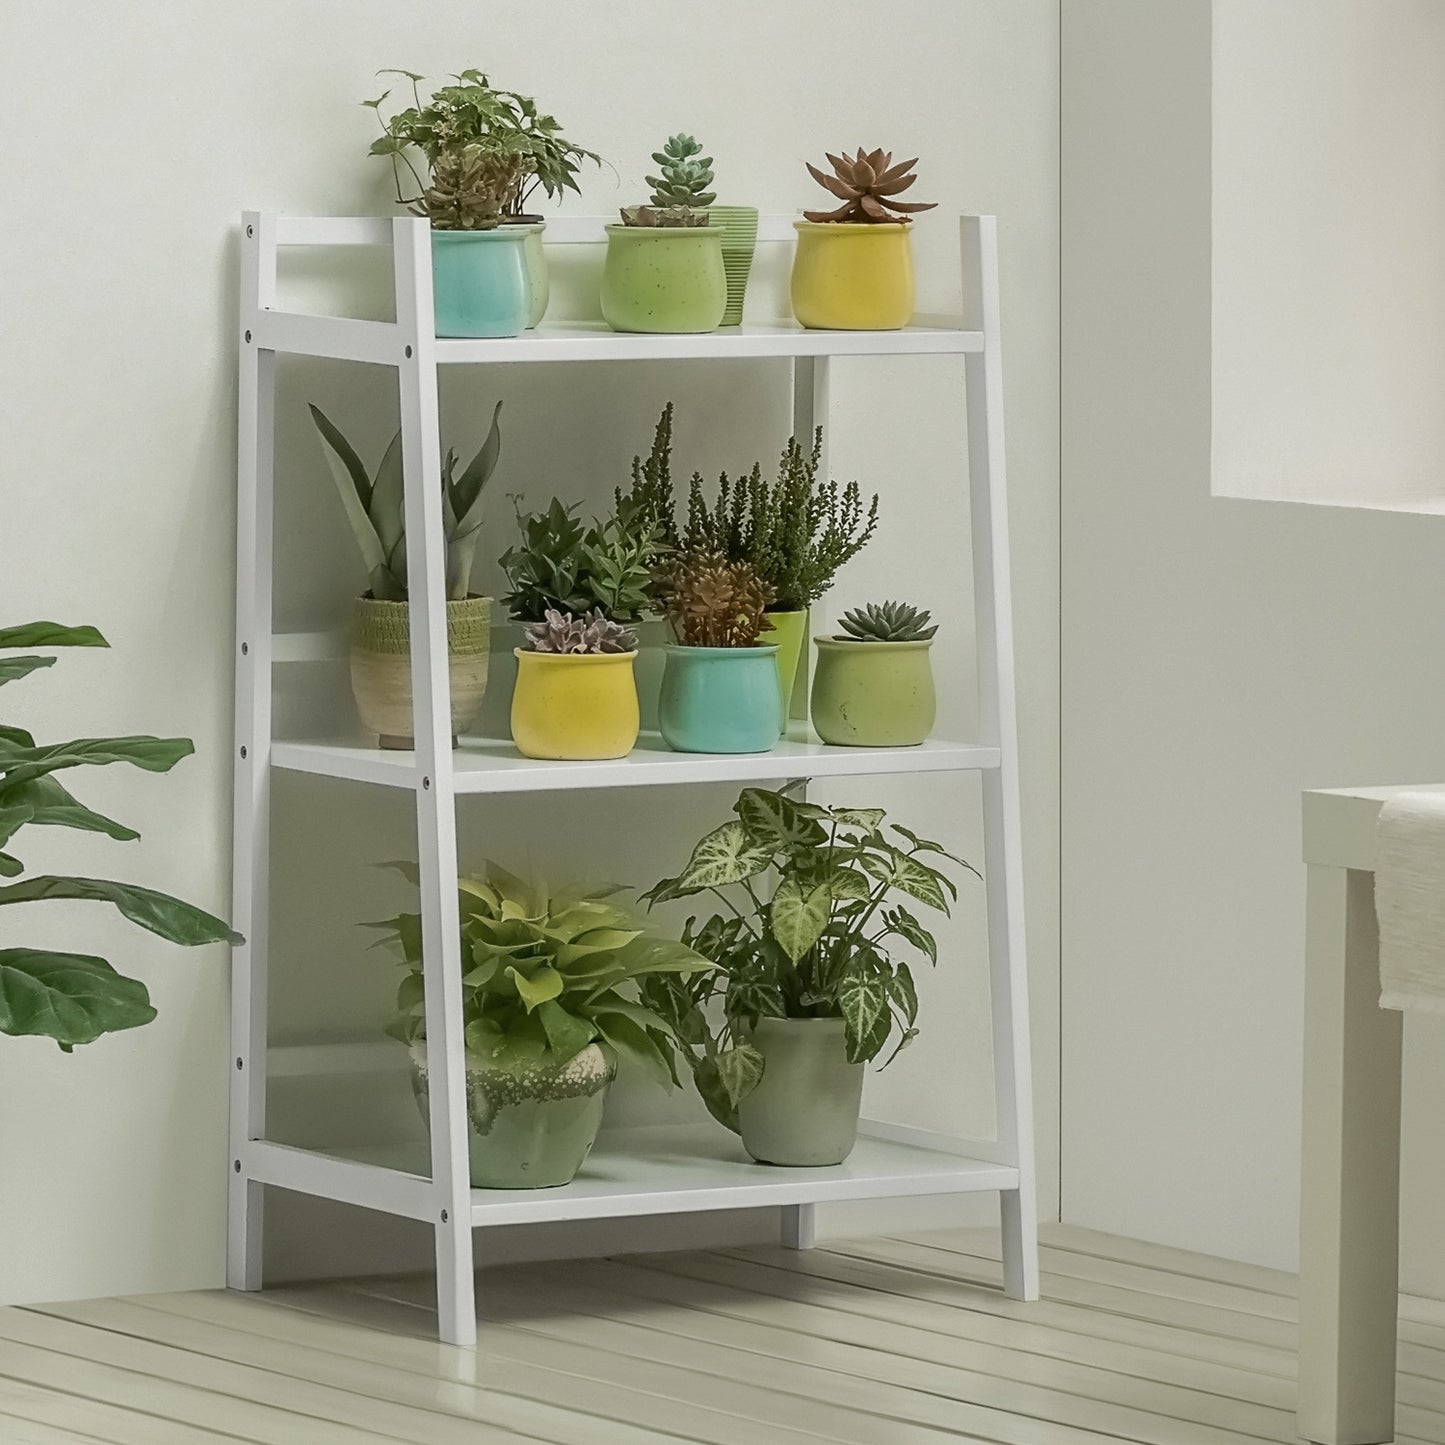 Simplified Trapezoid Multi-Functional Flower Plant Rack - 3 Tier - White